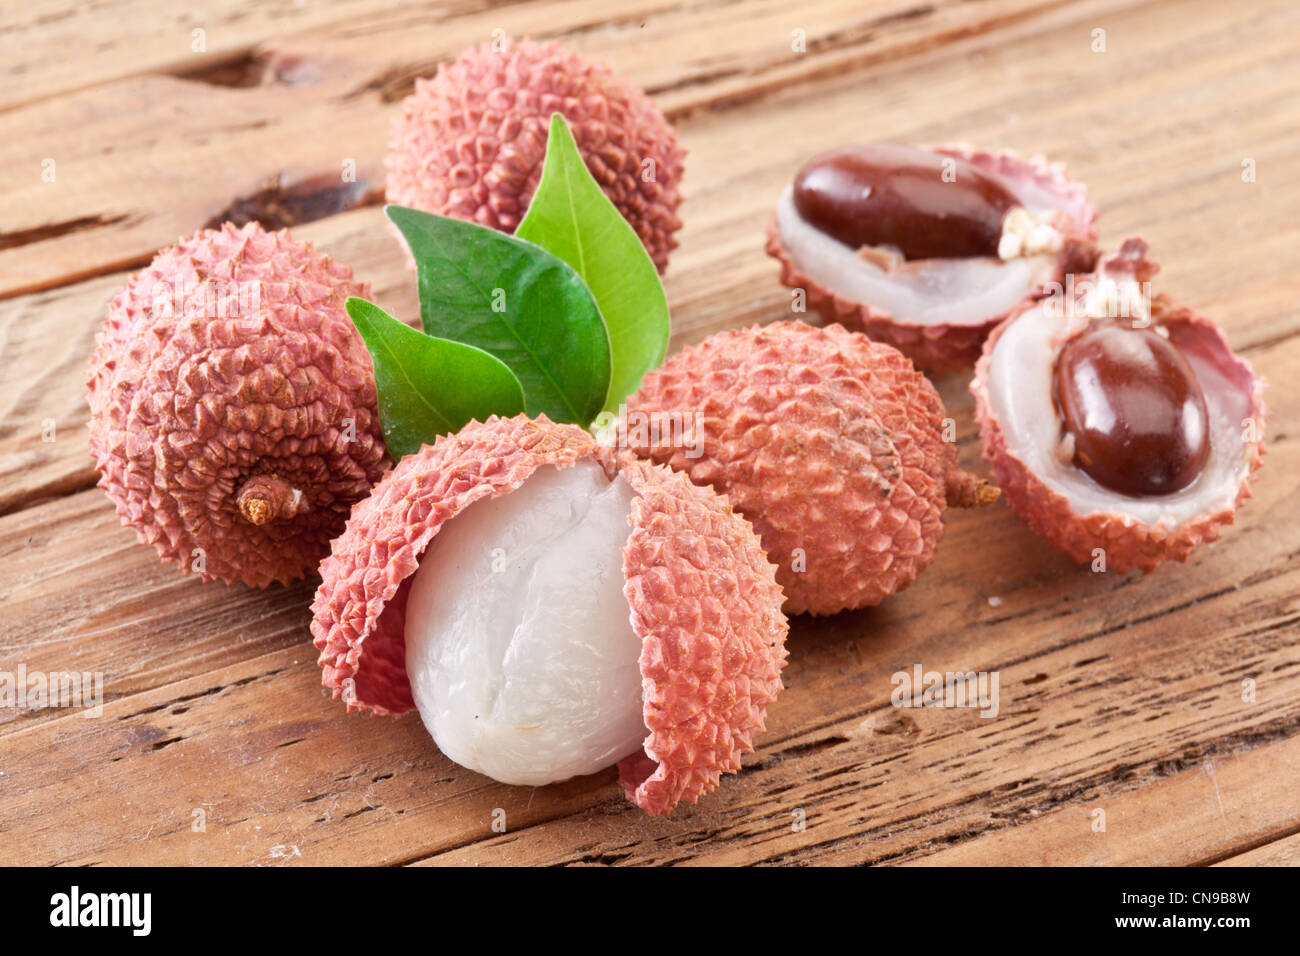 Lychee with leaves on a wooden table. Stock Photo